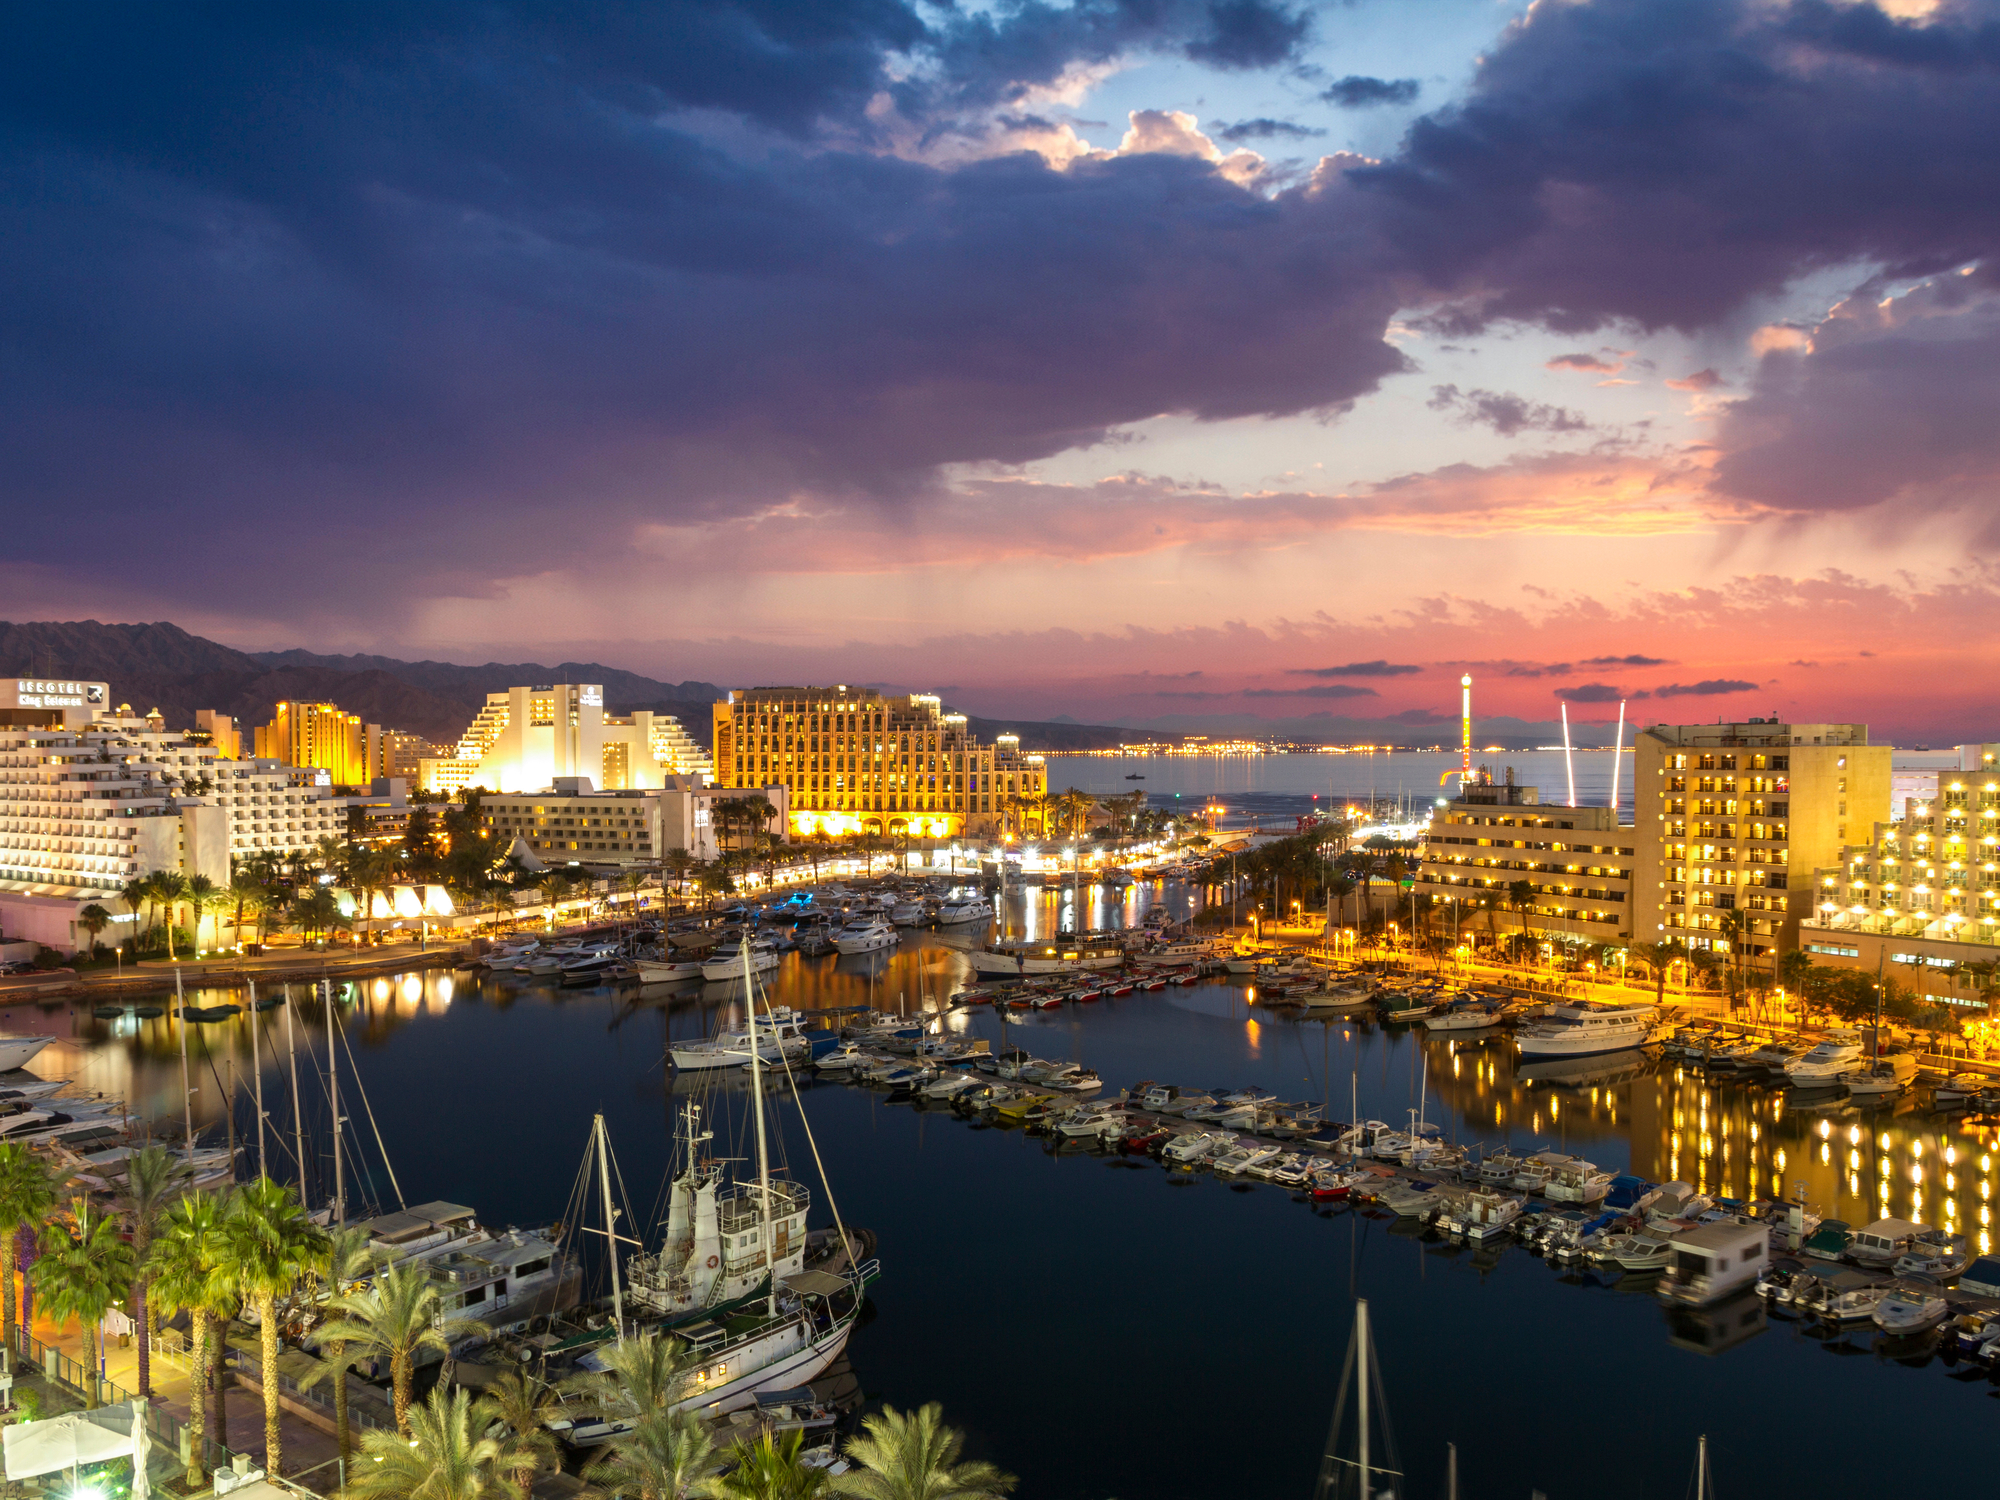 Israel to host contest first time in Eilat